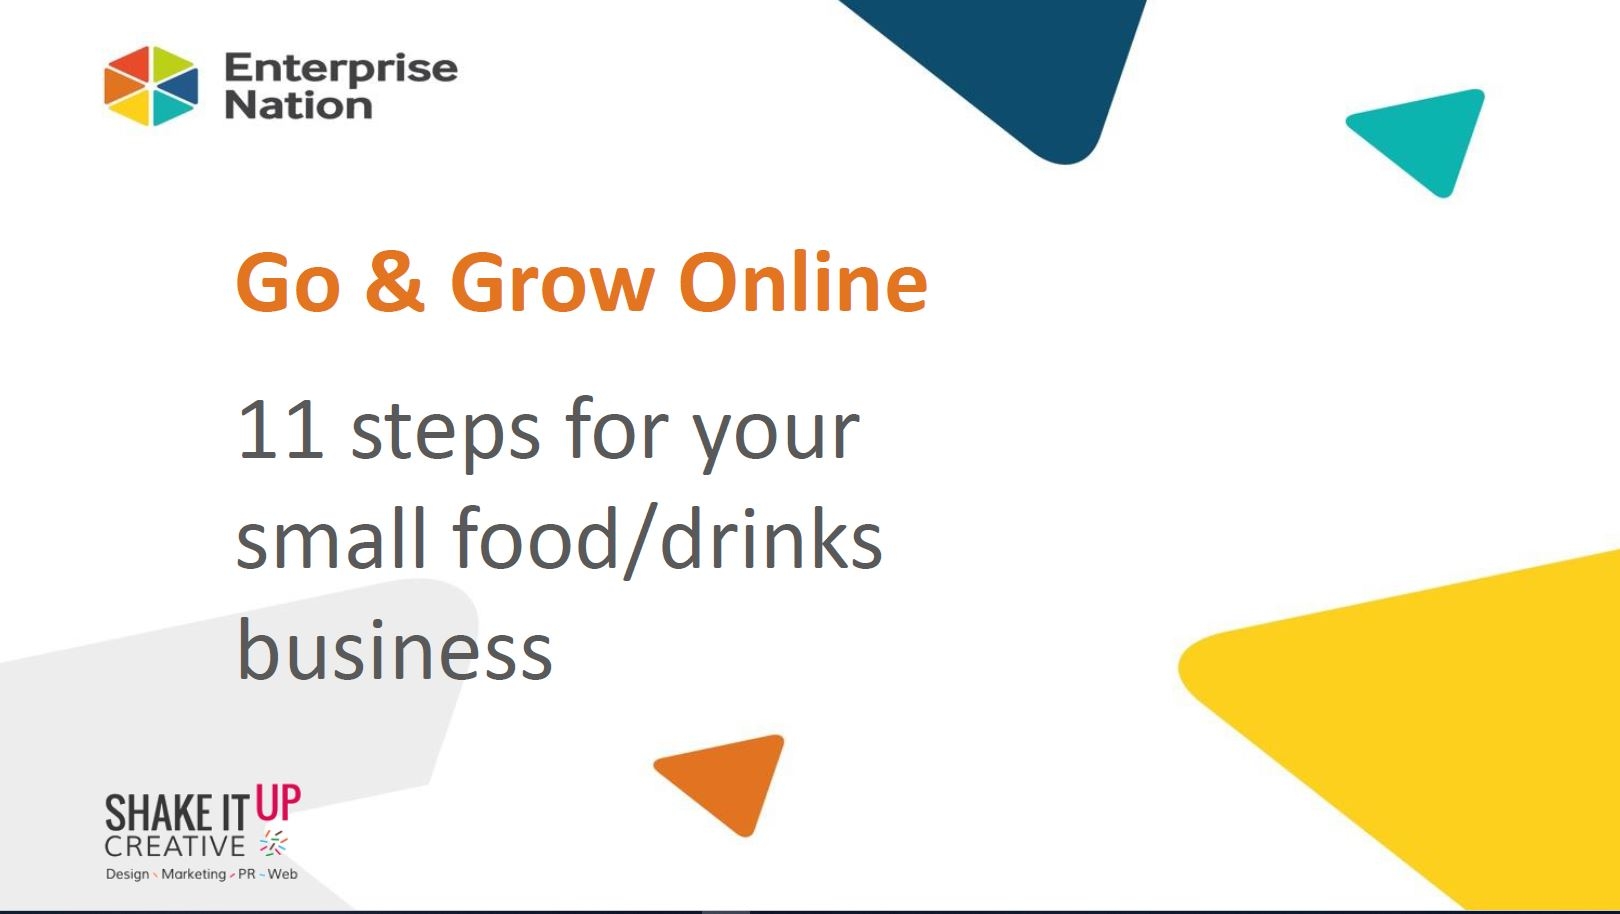 Growing your food and drink business online